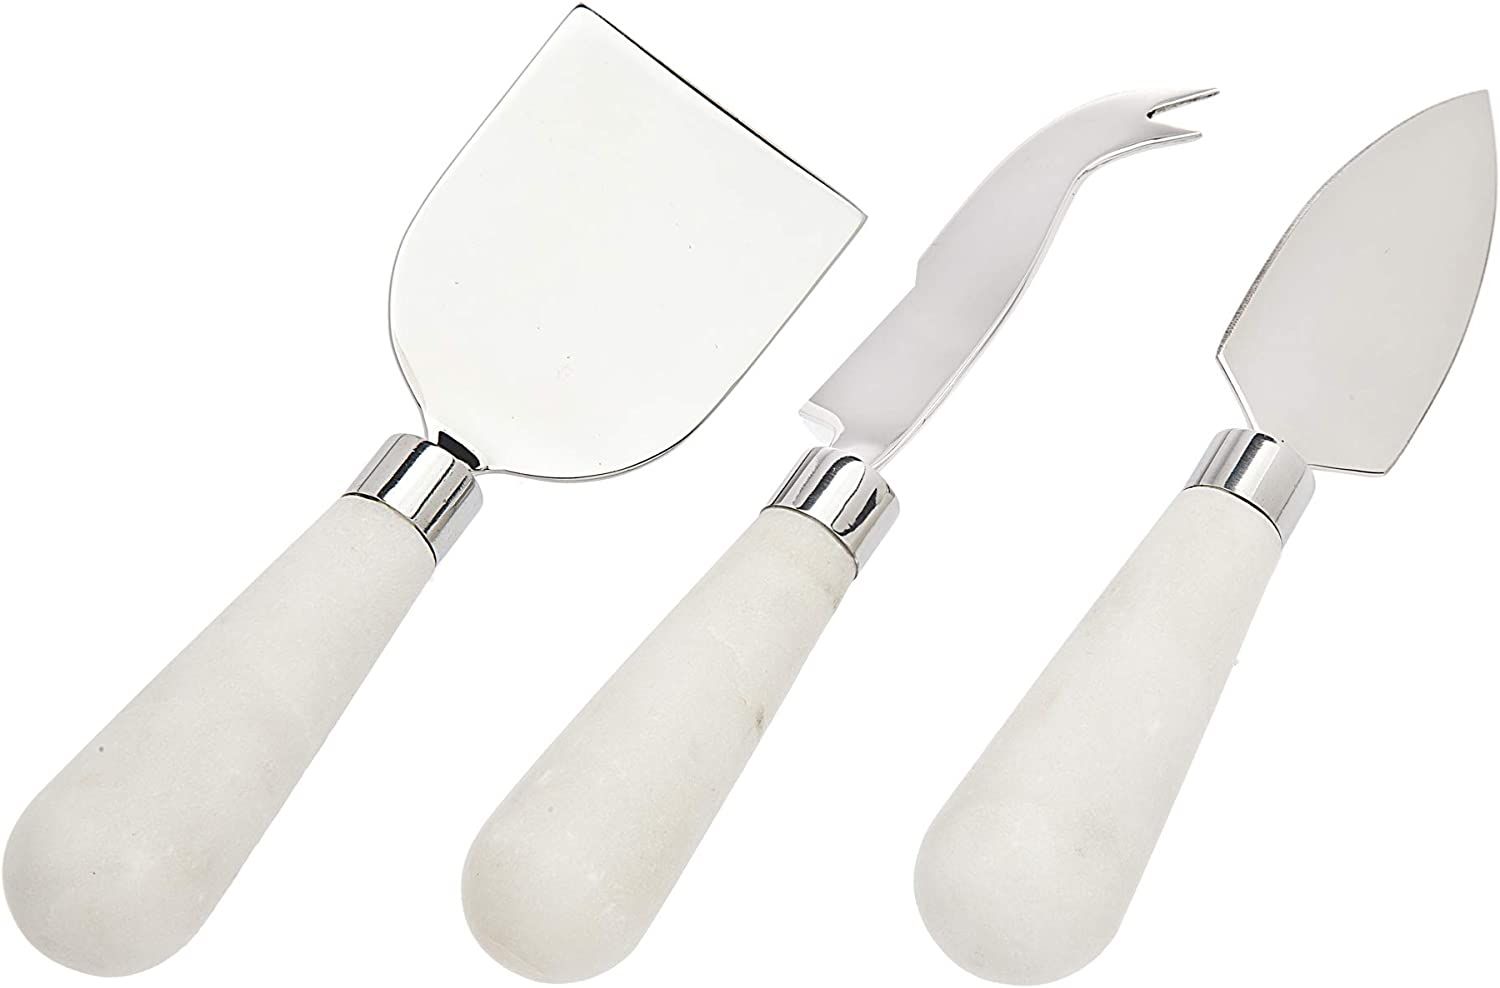 Godinger Cheese Knives Carving Tools White Marble Handle 3-Piece Set | Amazon (US)